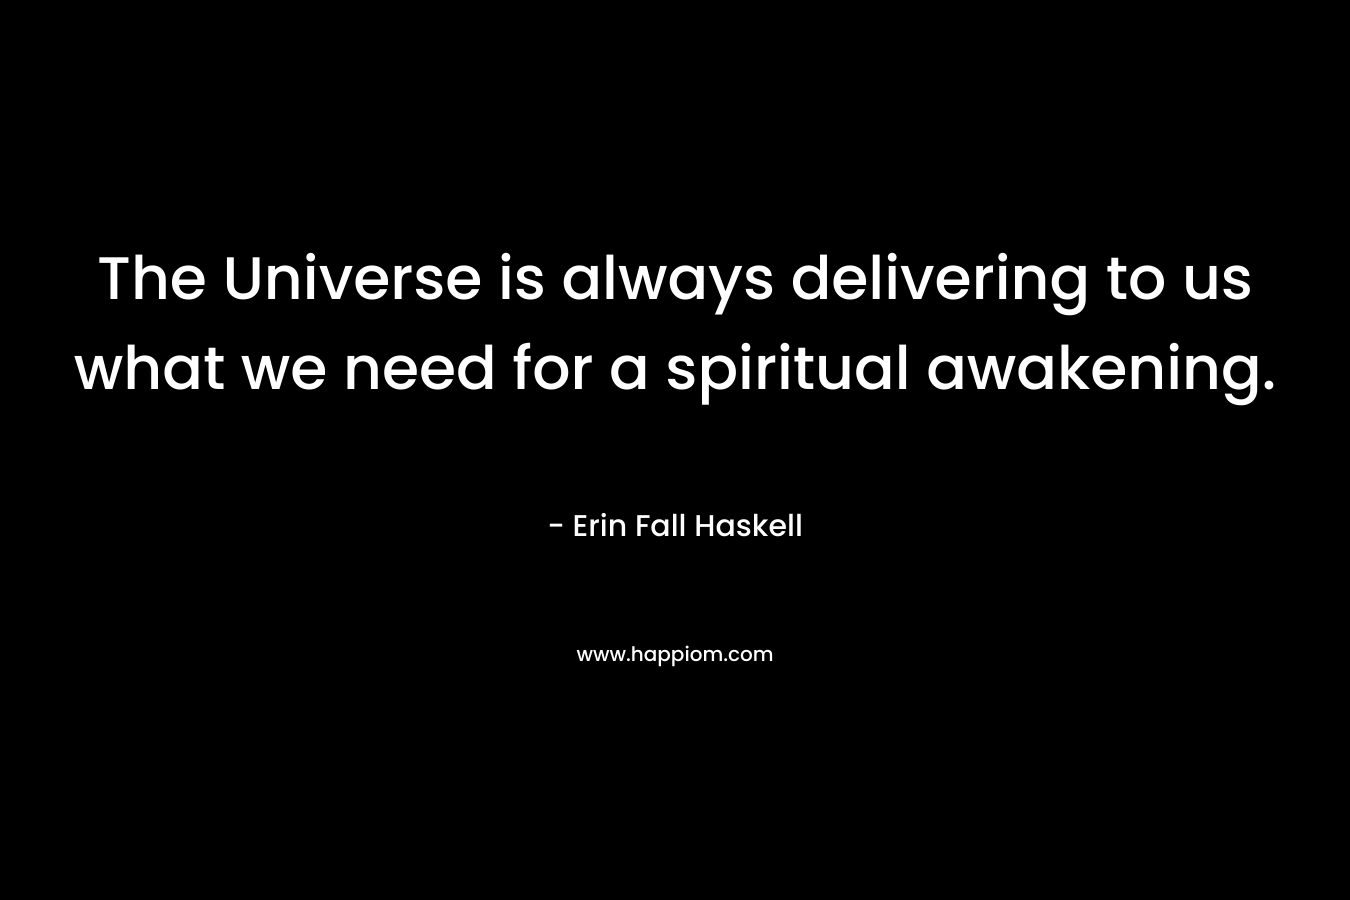 The Universe is always delivering to us what we need for a spiritual awakening.